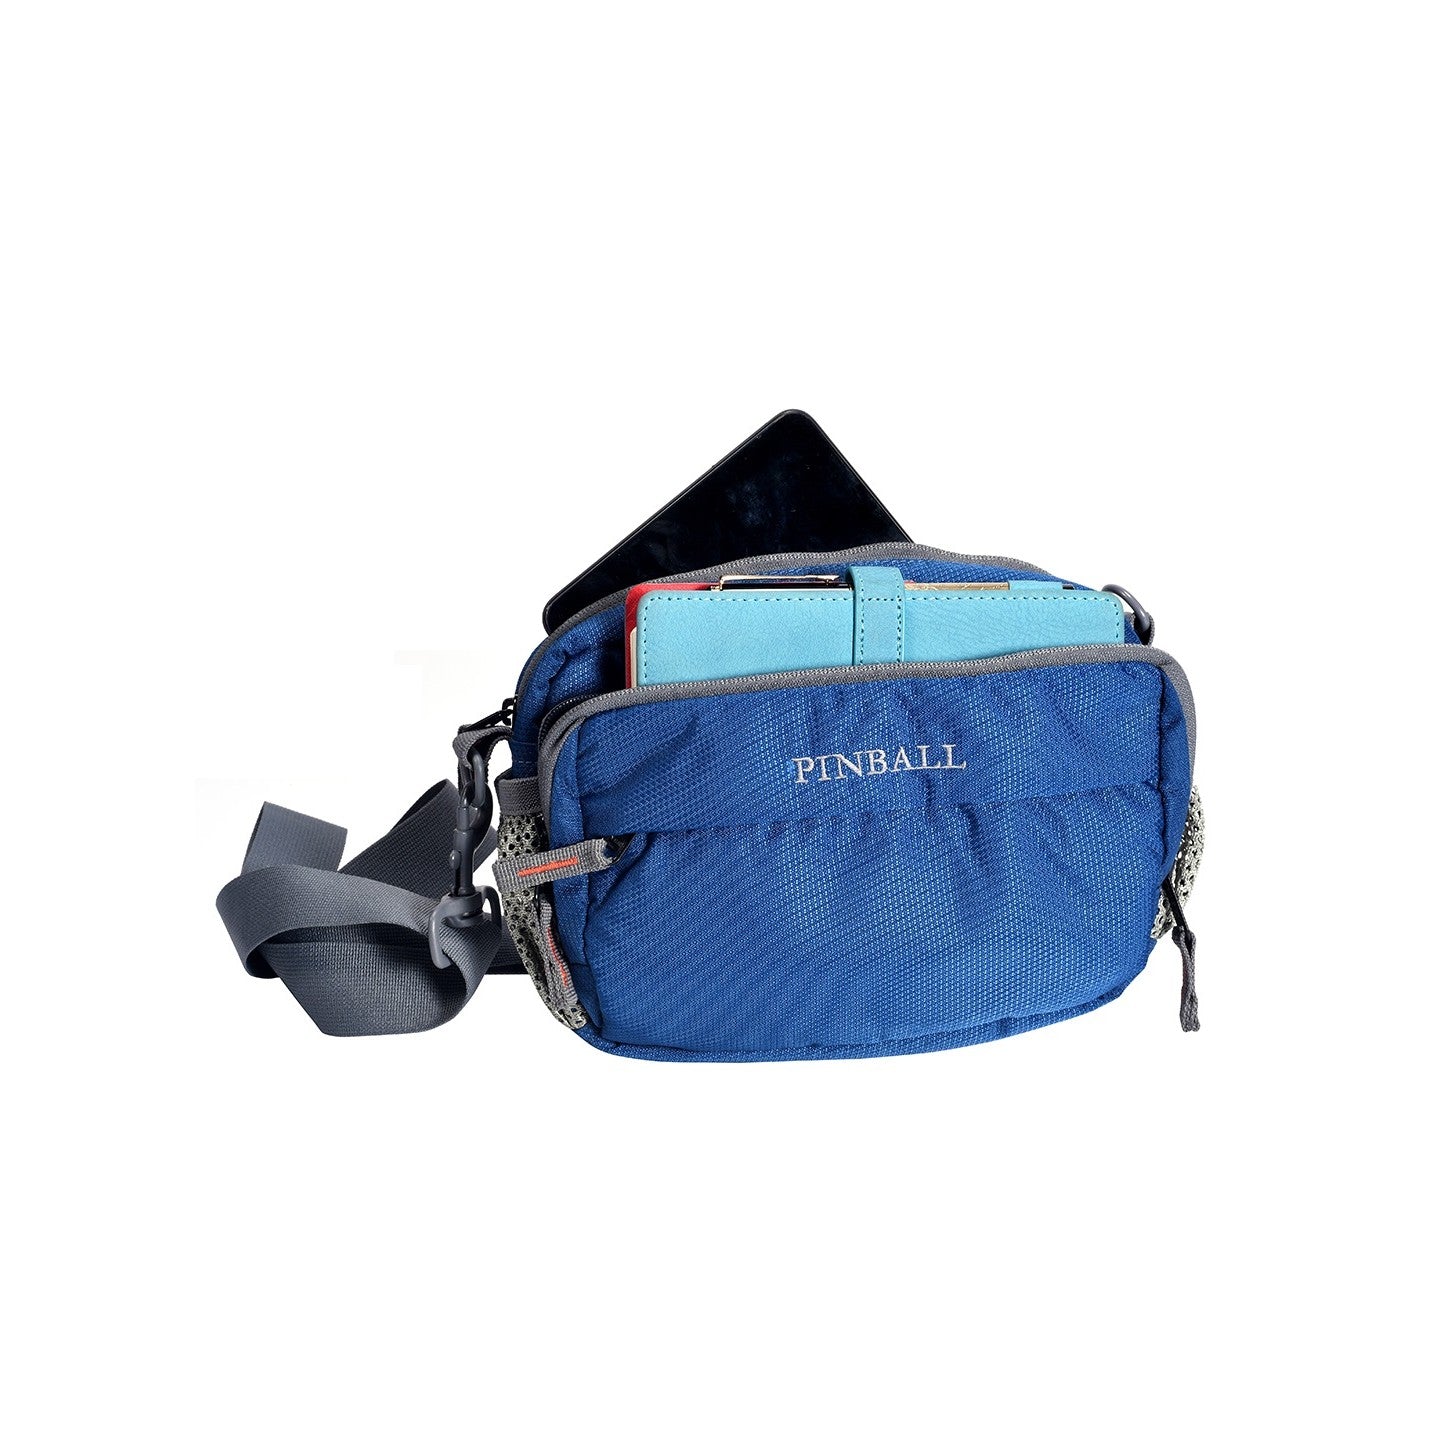 "Image: Top view of the P27 Organiser sling cum waist bag, showcasing its ability to hold a wide variety of photography accessories. The bag's compartments are filled with various items such as memory cards, batteries, lens filters, cables, and more, demonstrating its capacity to accommodate numerous items and keep them organized. Stay prepared and have all your essential accessories within reach with the P27 Organiser."